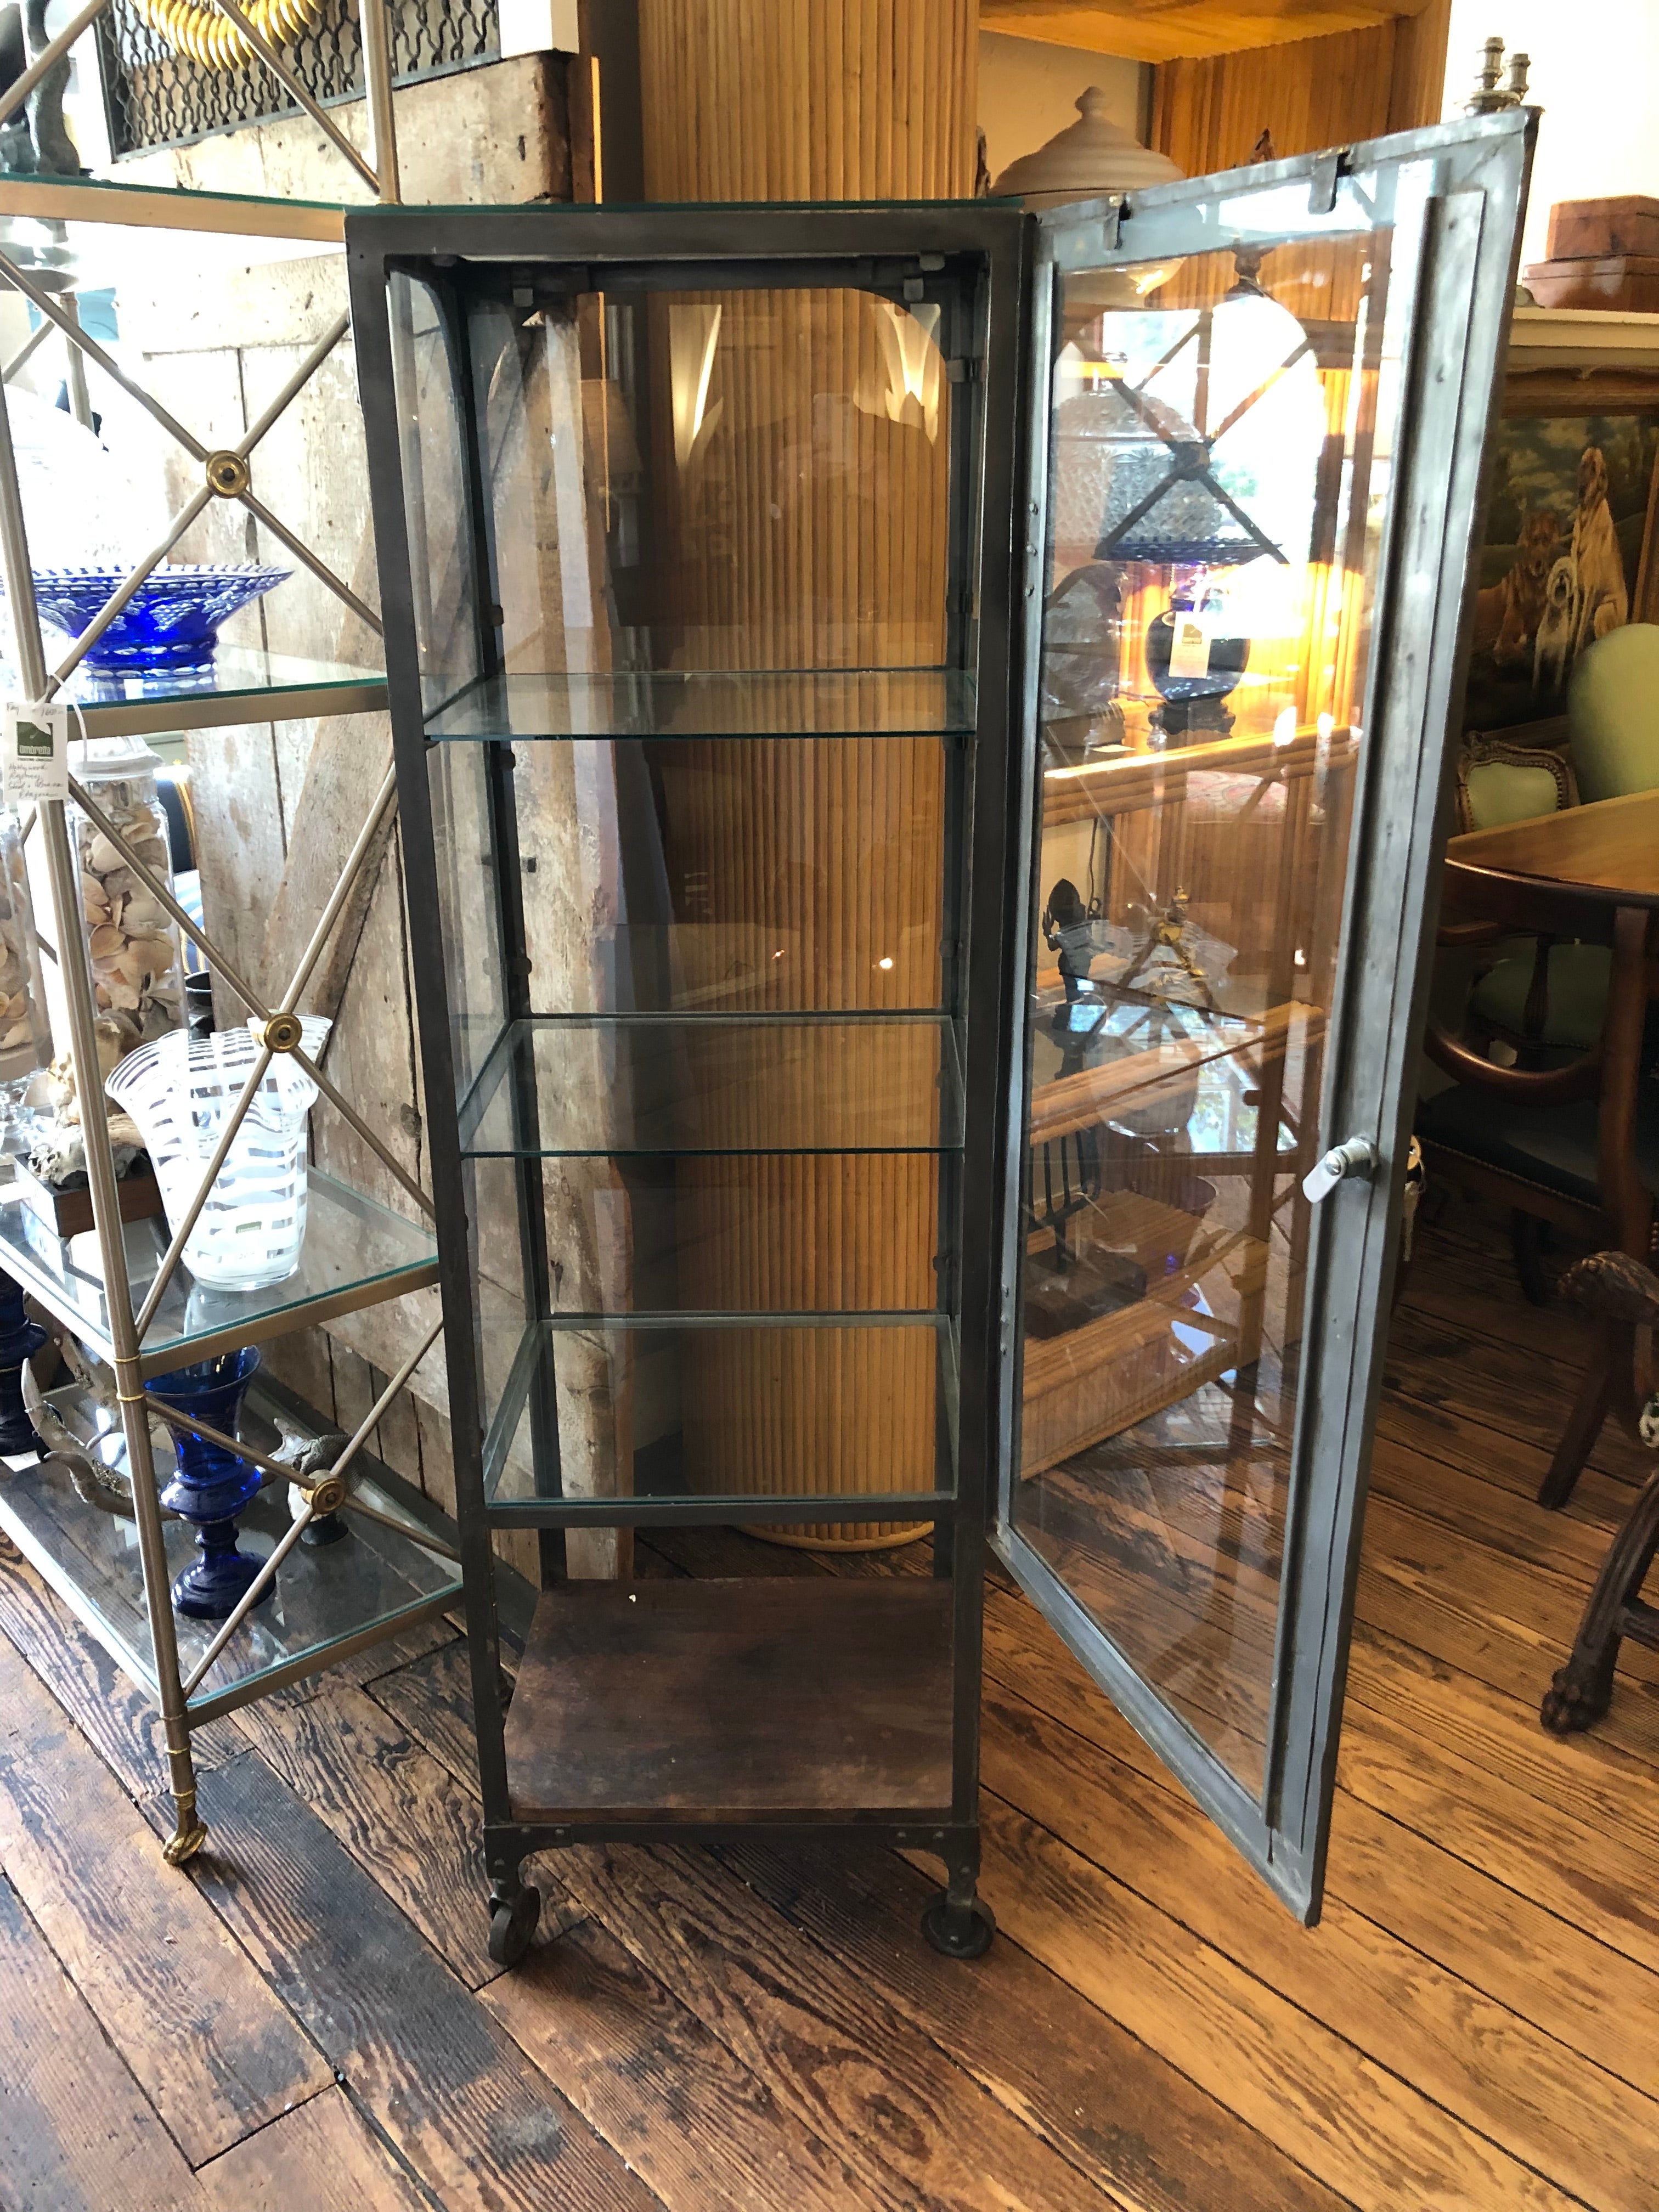 Multi functional cool looking vintage grey steel medicine cabinet having glass door, sides, top and shelves.  Lower tier is wood and the whole vitrine rolls easily on wheels.  Great in a bathroom for towels and toilet paper, etc.  Or an artist's